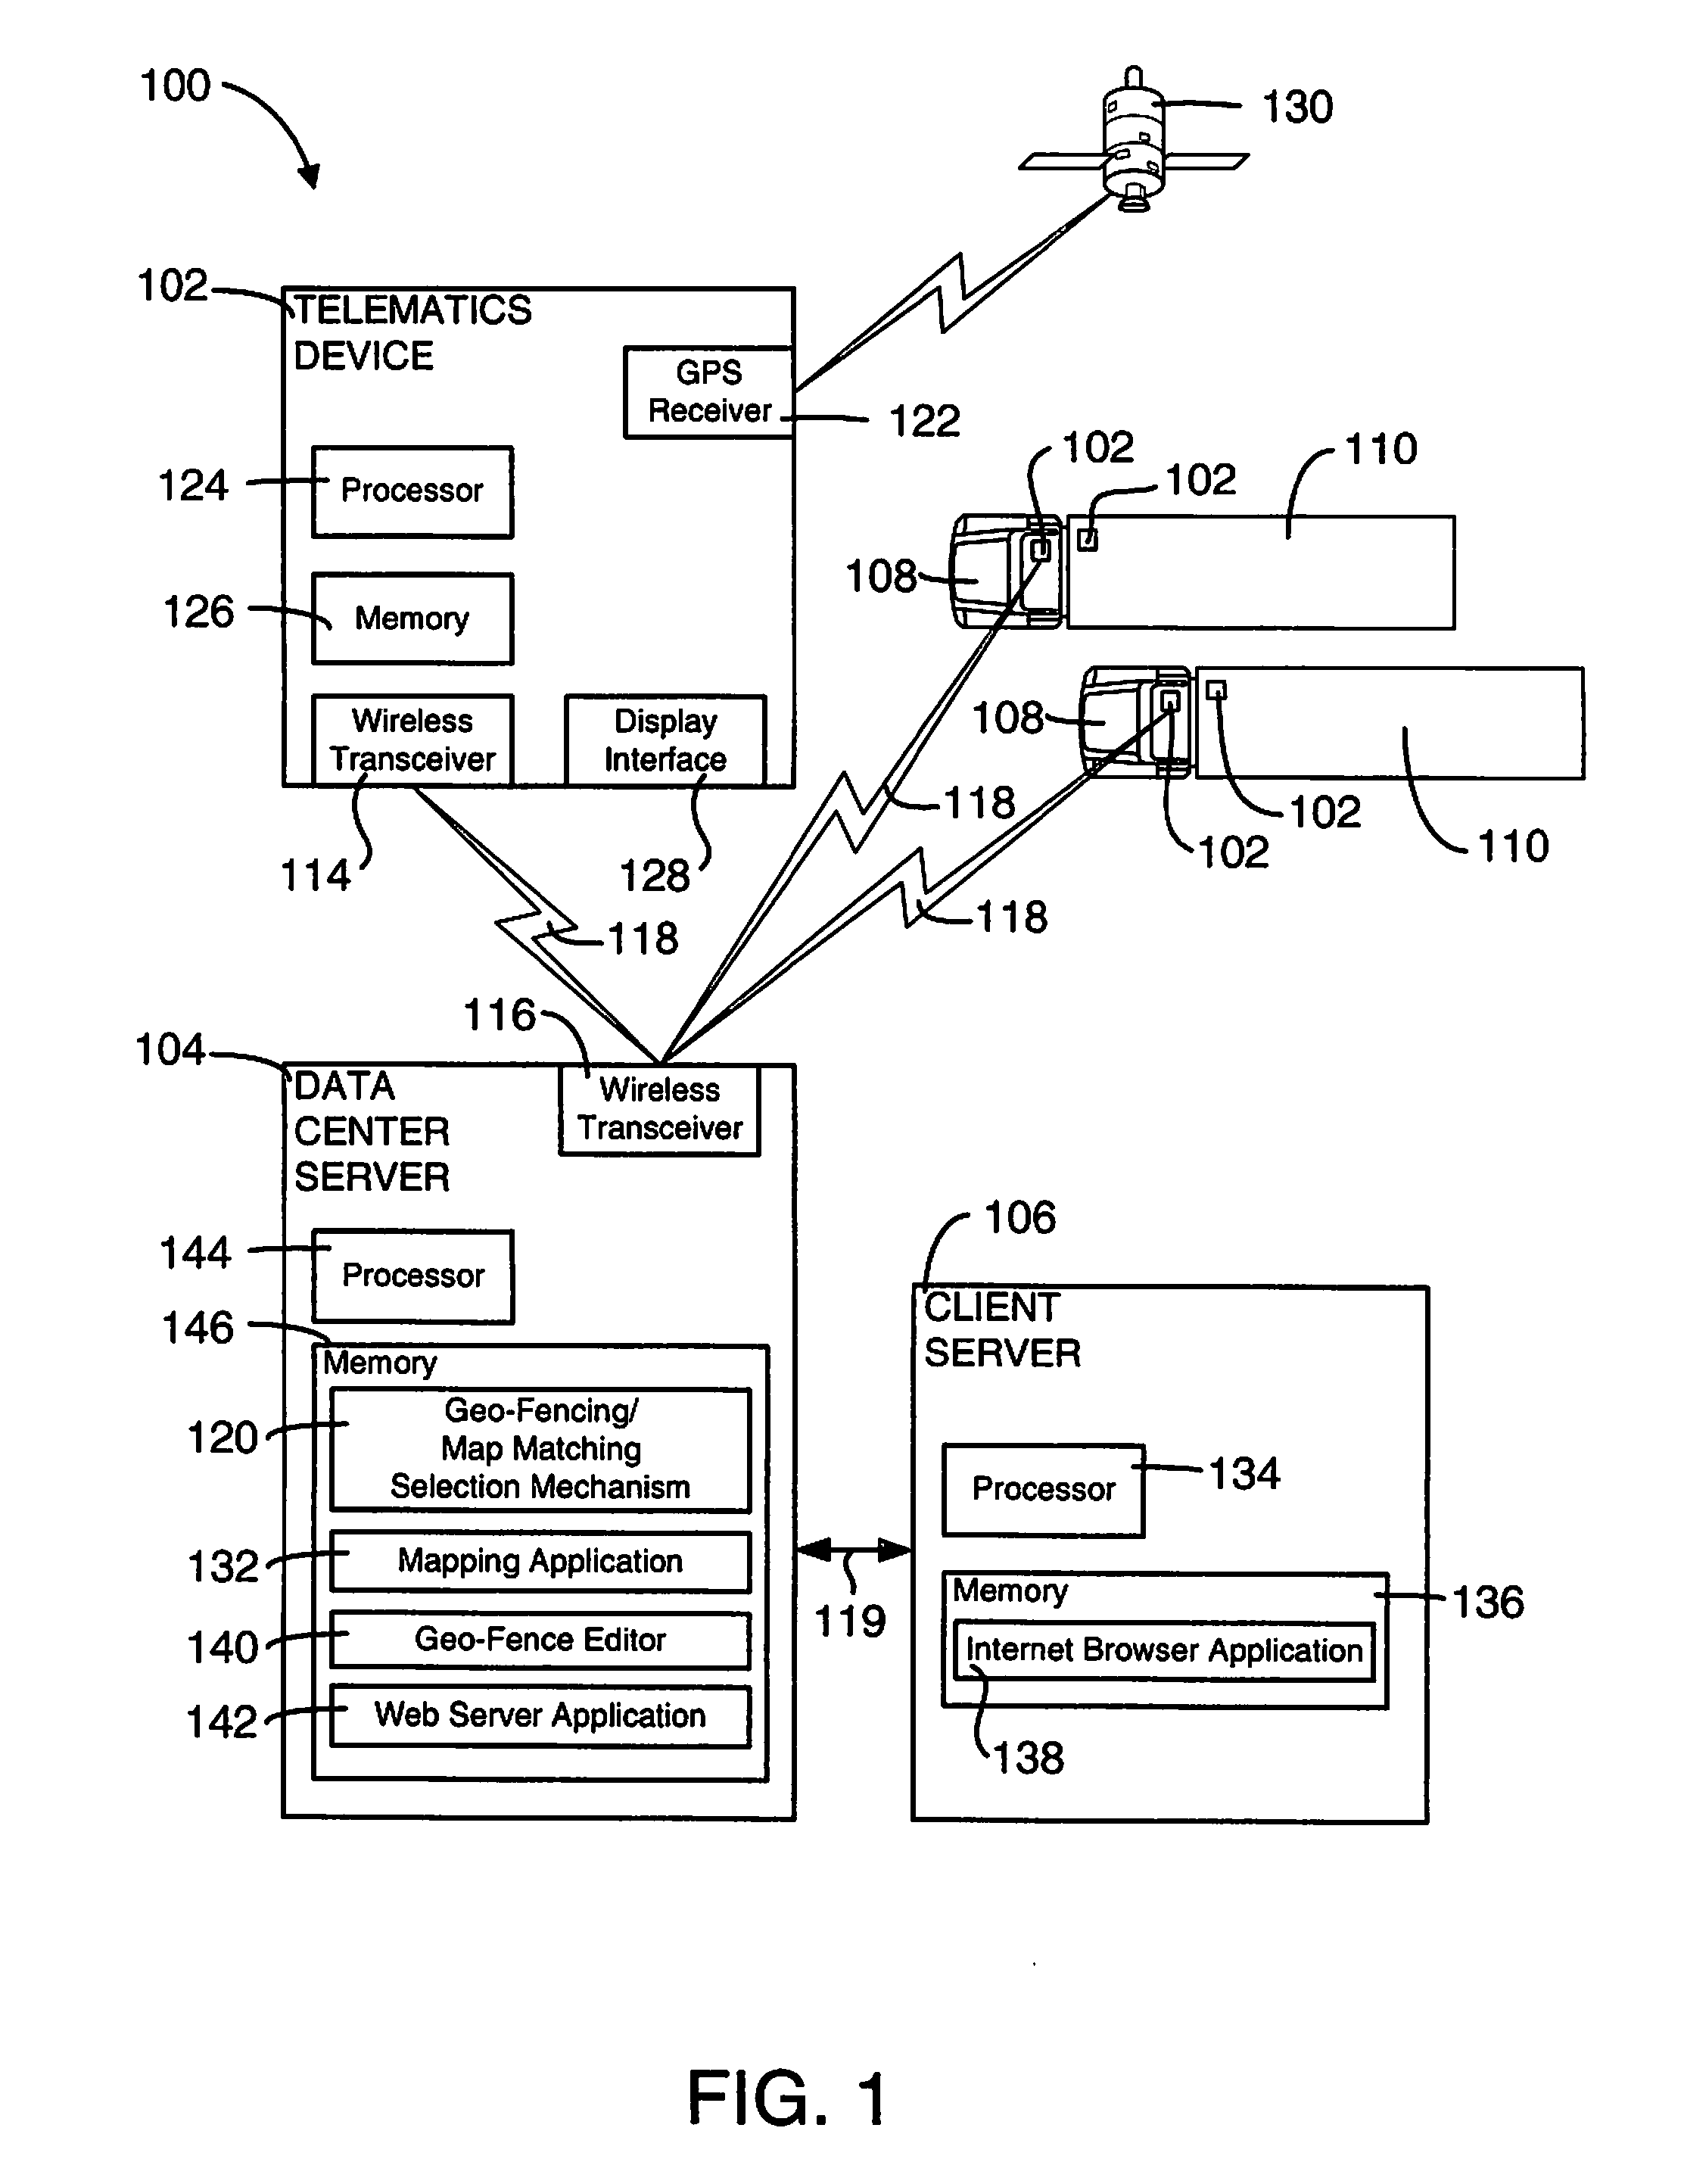 Method, Apparatus, and Computer Program Product for Intelligently Selecting Between the Utilization of Geo-Fencing and Map Matching in a Telematics System